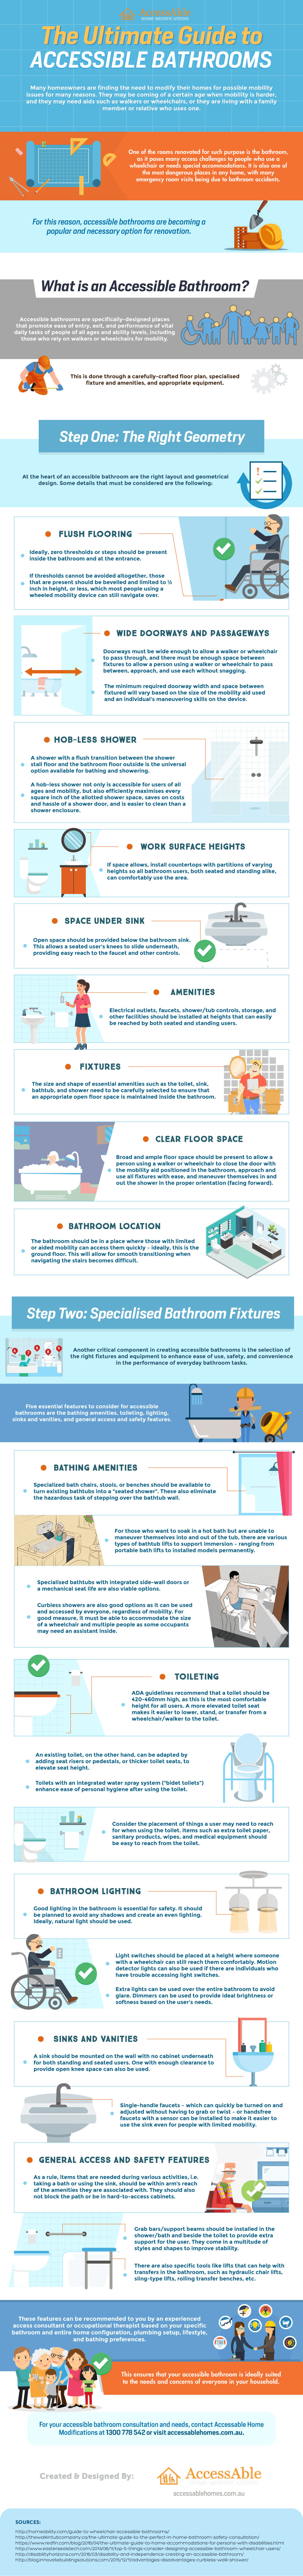 Guide-to-Accessible-Bathrooms